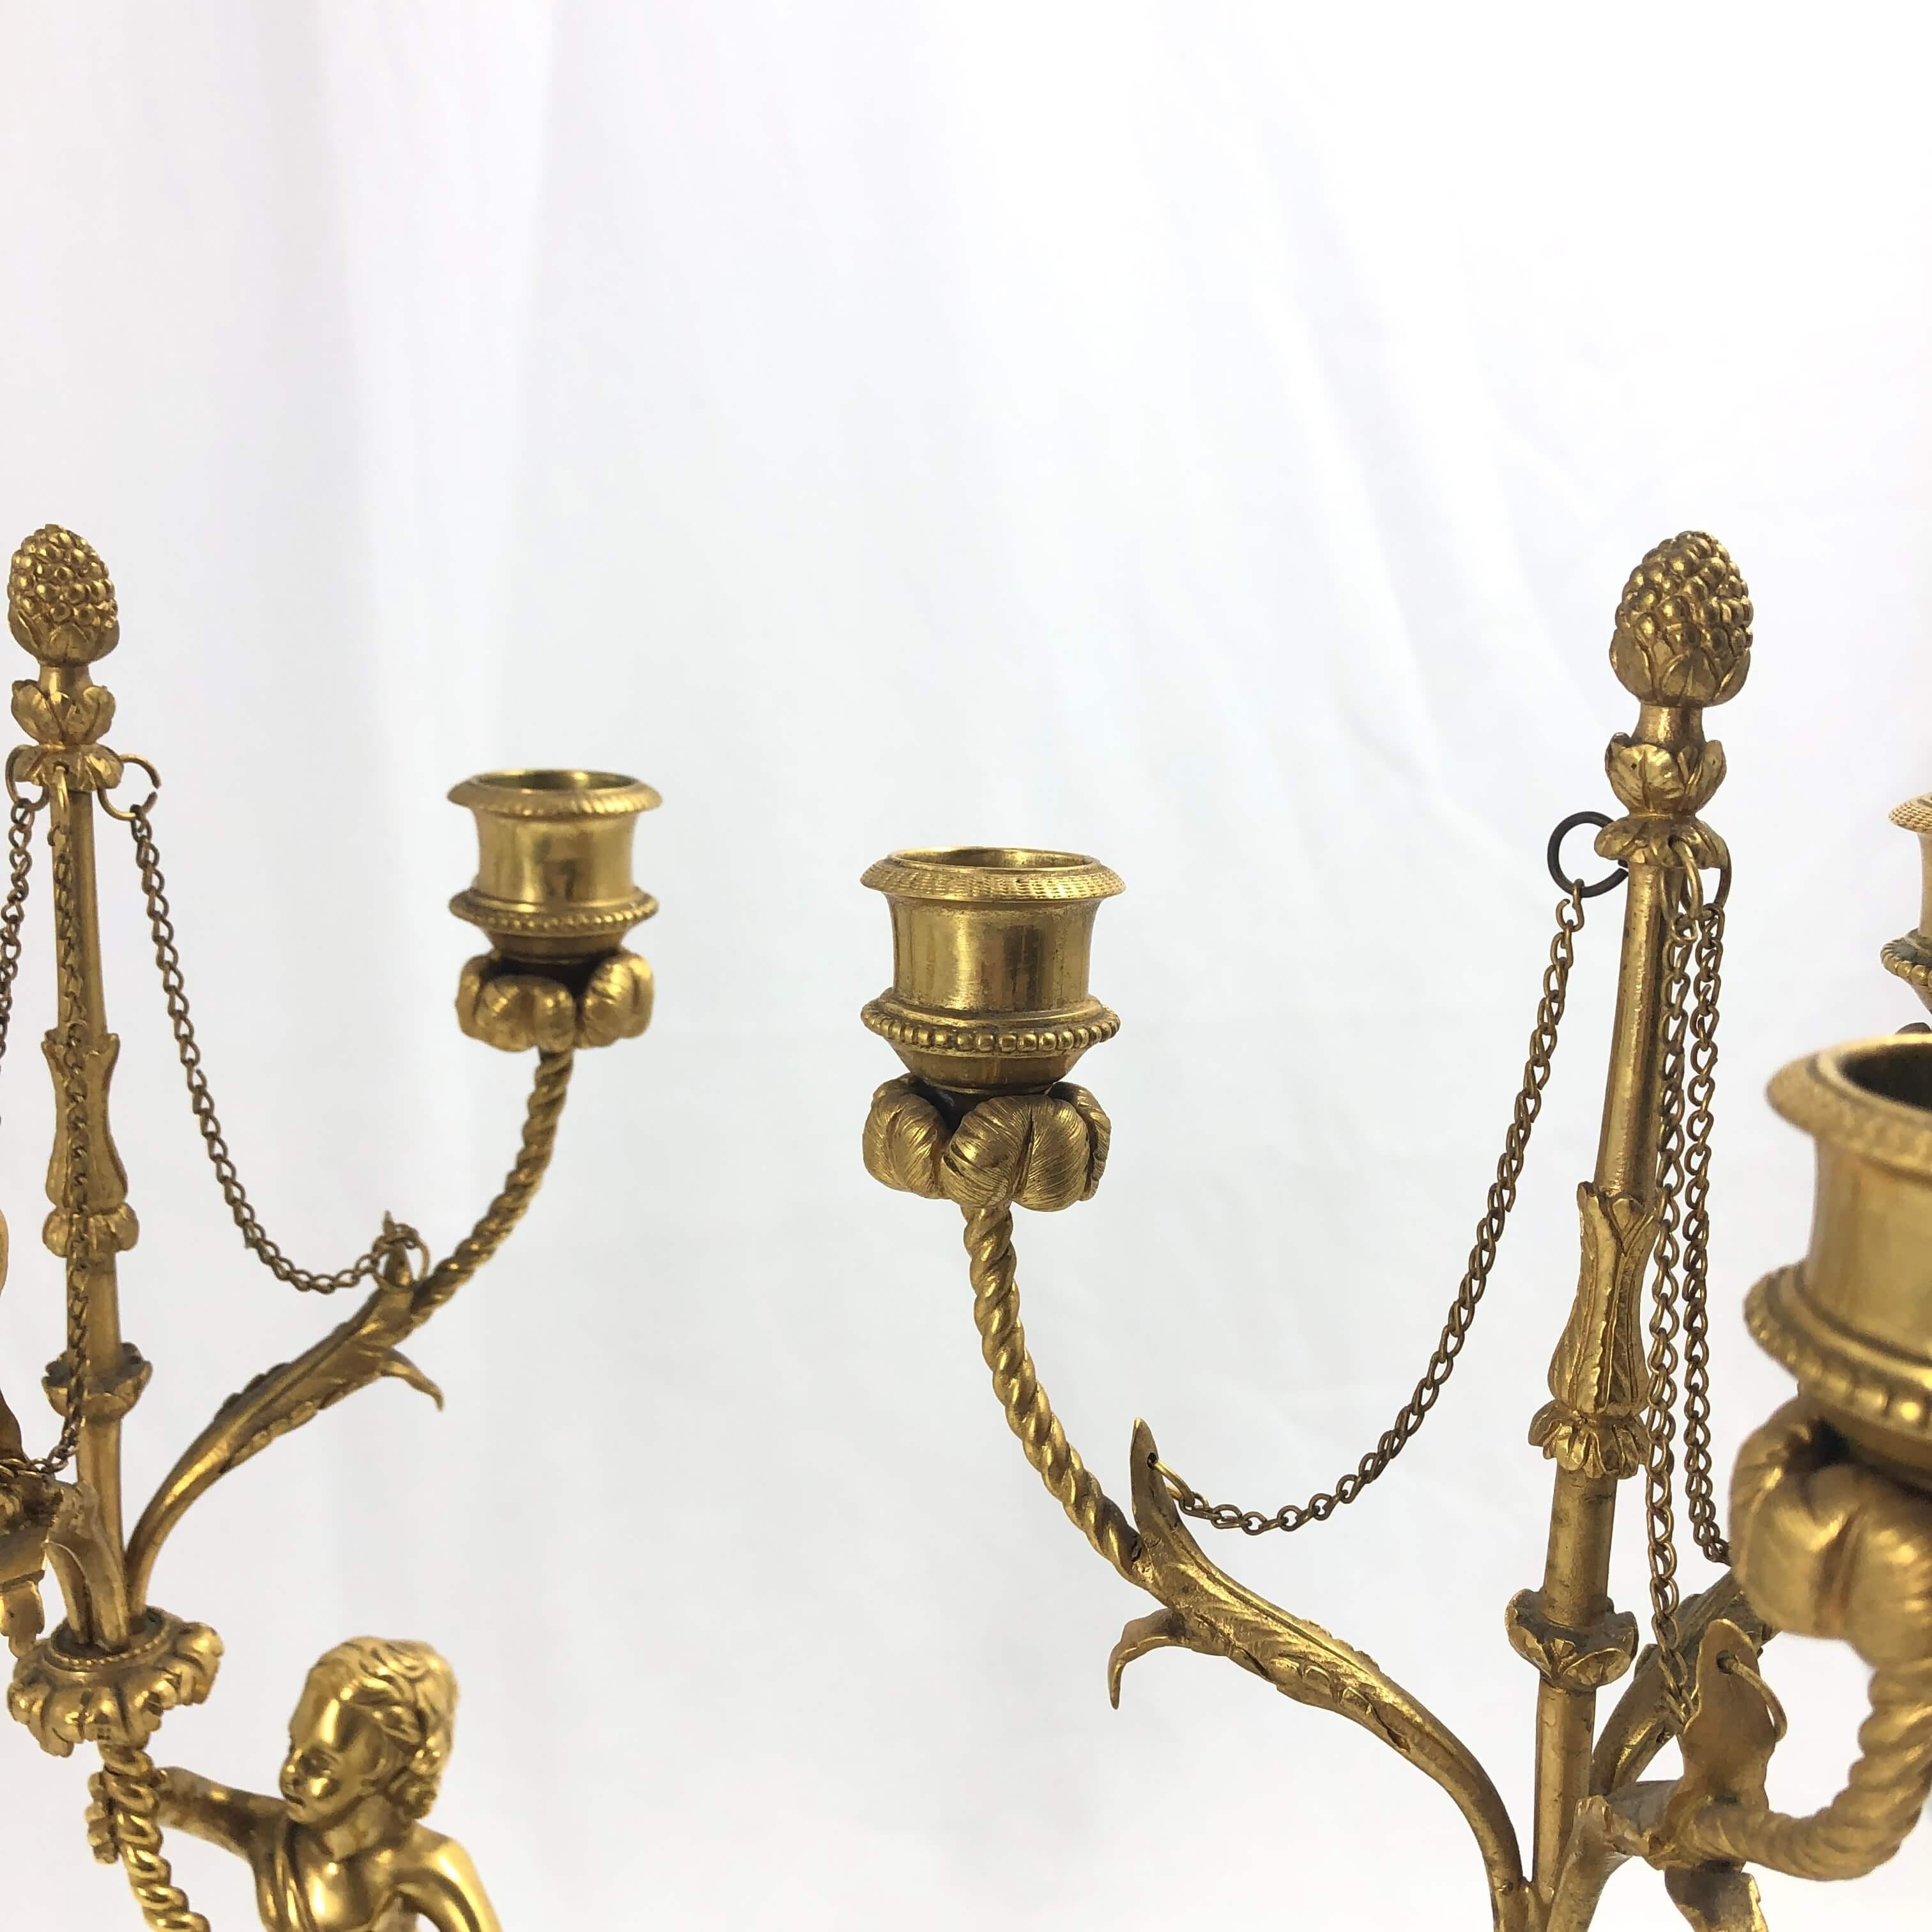 A fine pair of French Louis XVI gilt bronze putti candelabra with each putti holding a three-light arm with floral motifs, acorn finials, and raised on a marble pedestal base with a bronze wreath mount.